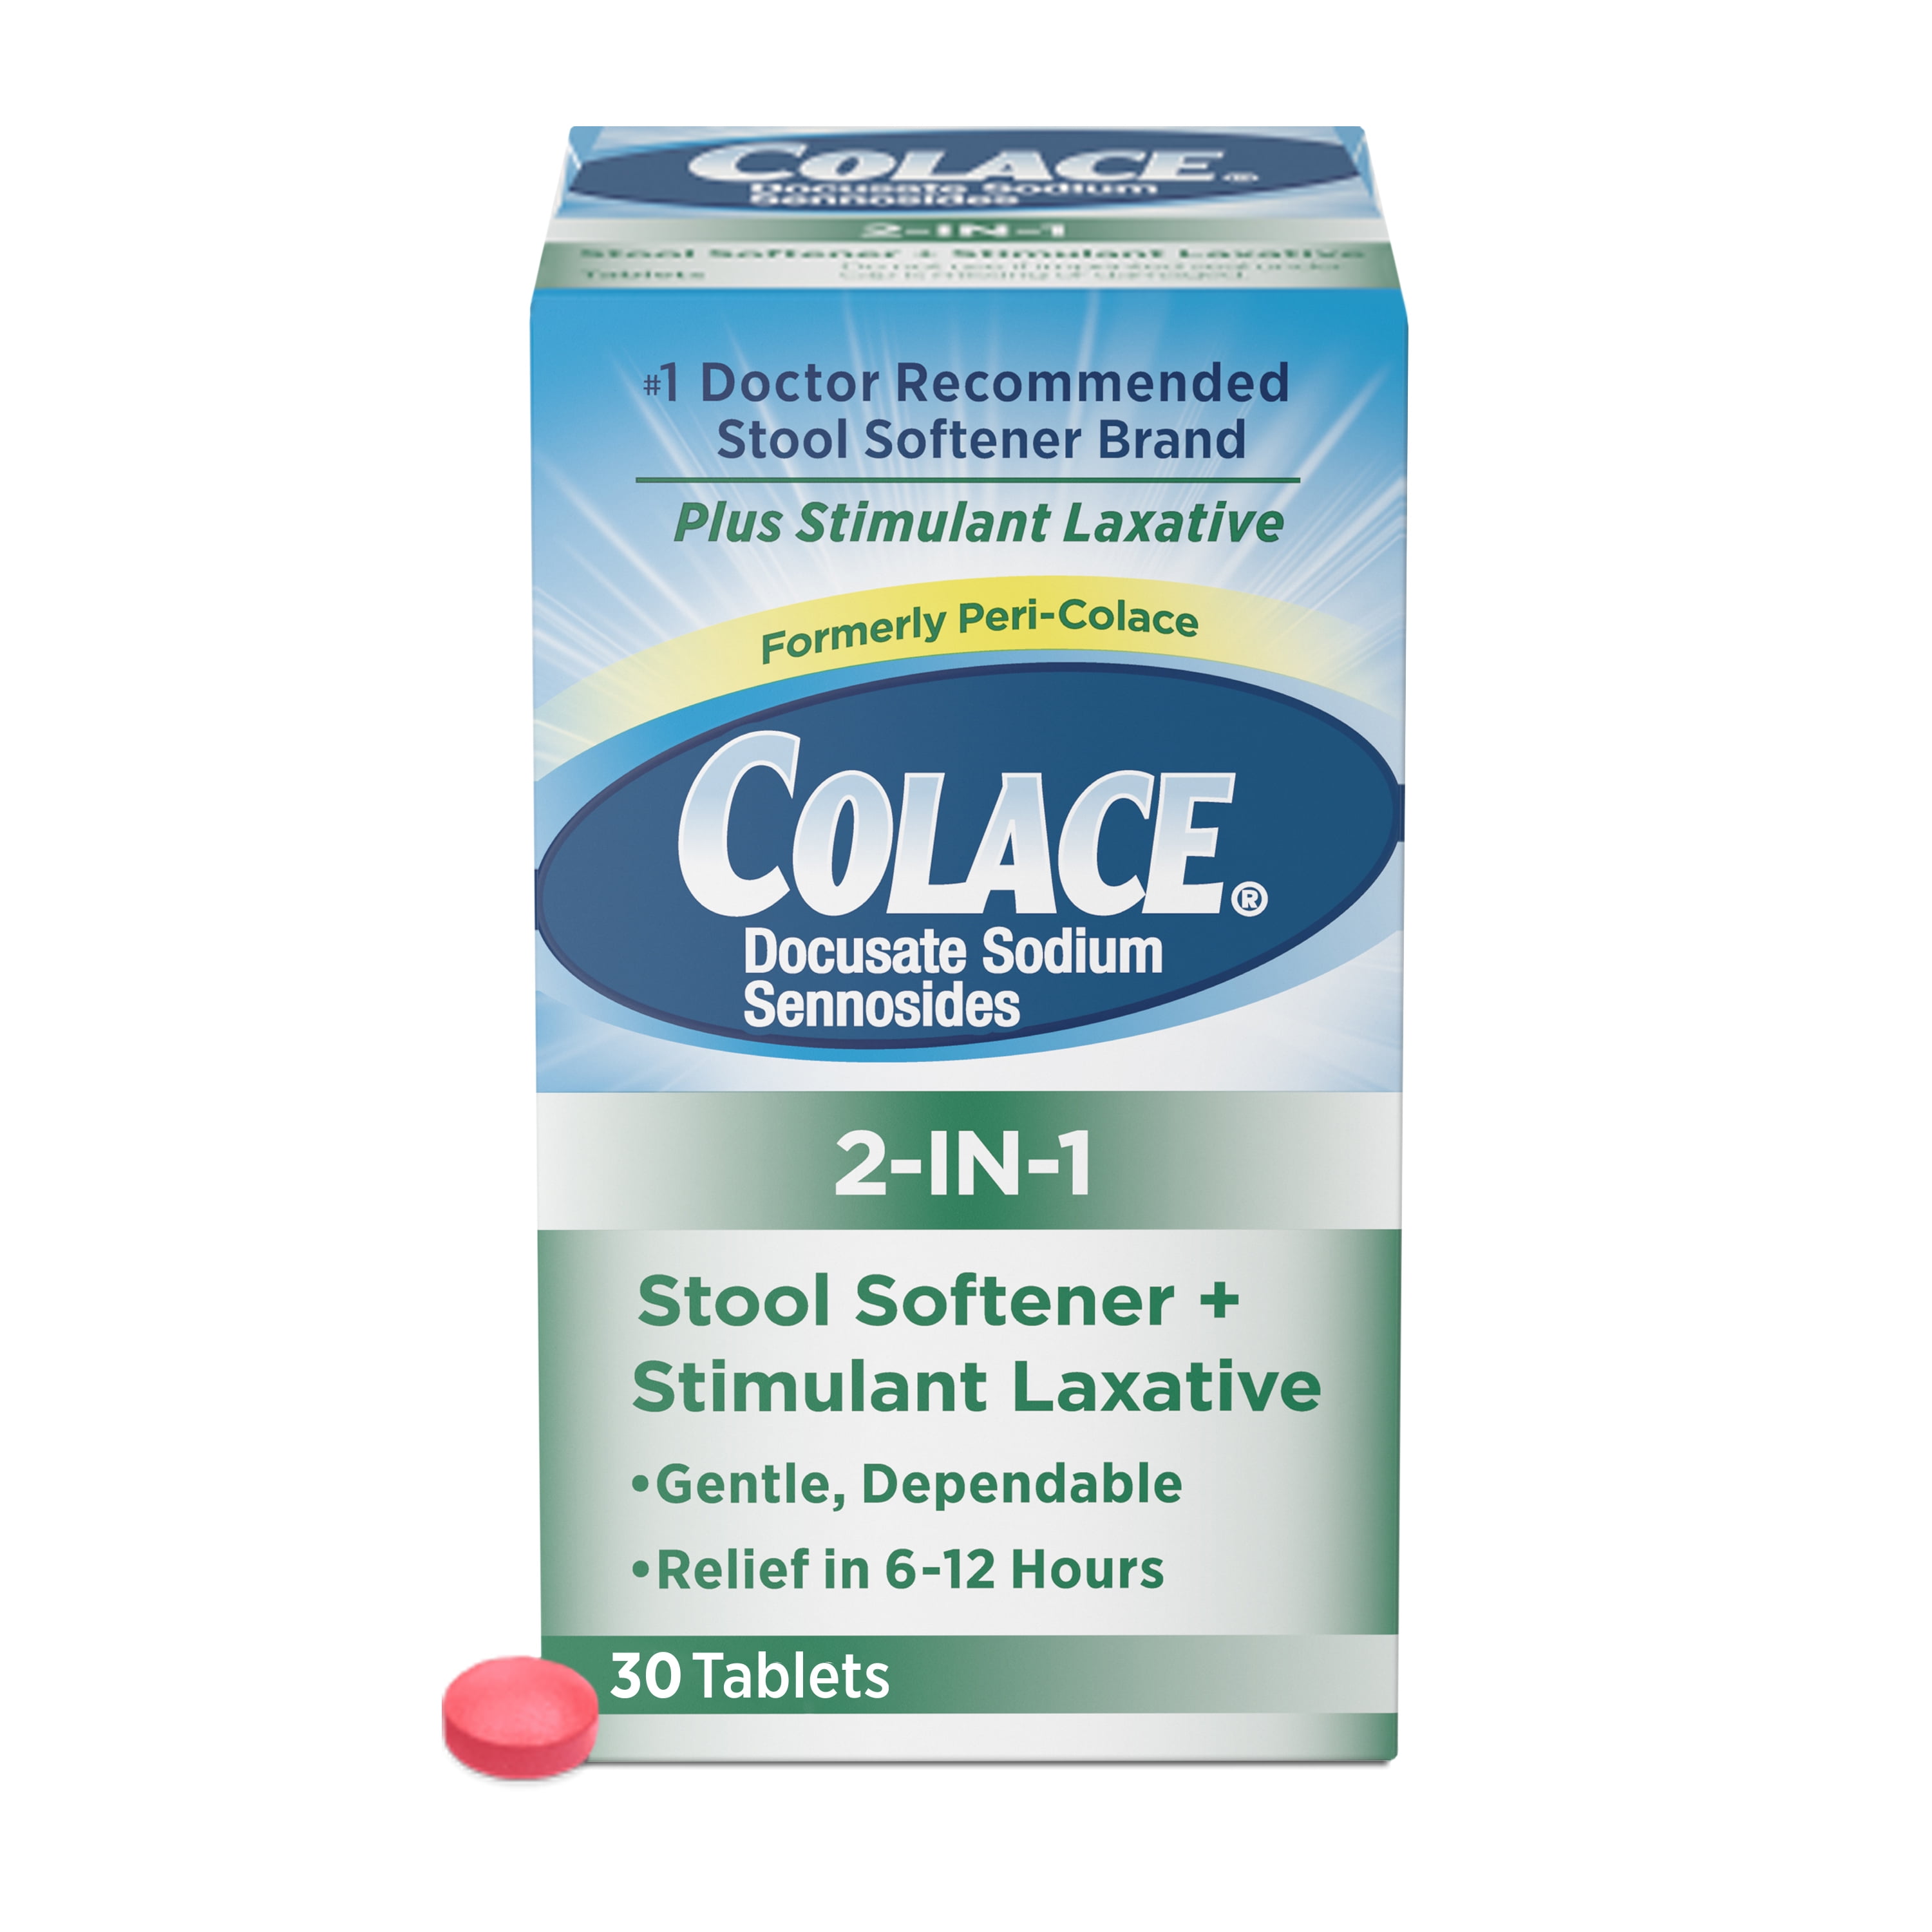 Colace 2-IN-1 Stool Softener with Stimulant Laxative Tablets, 100mg, 30 Count